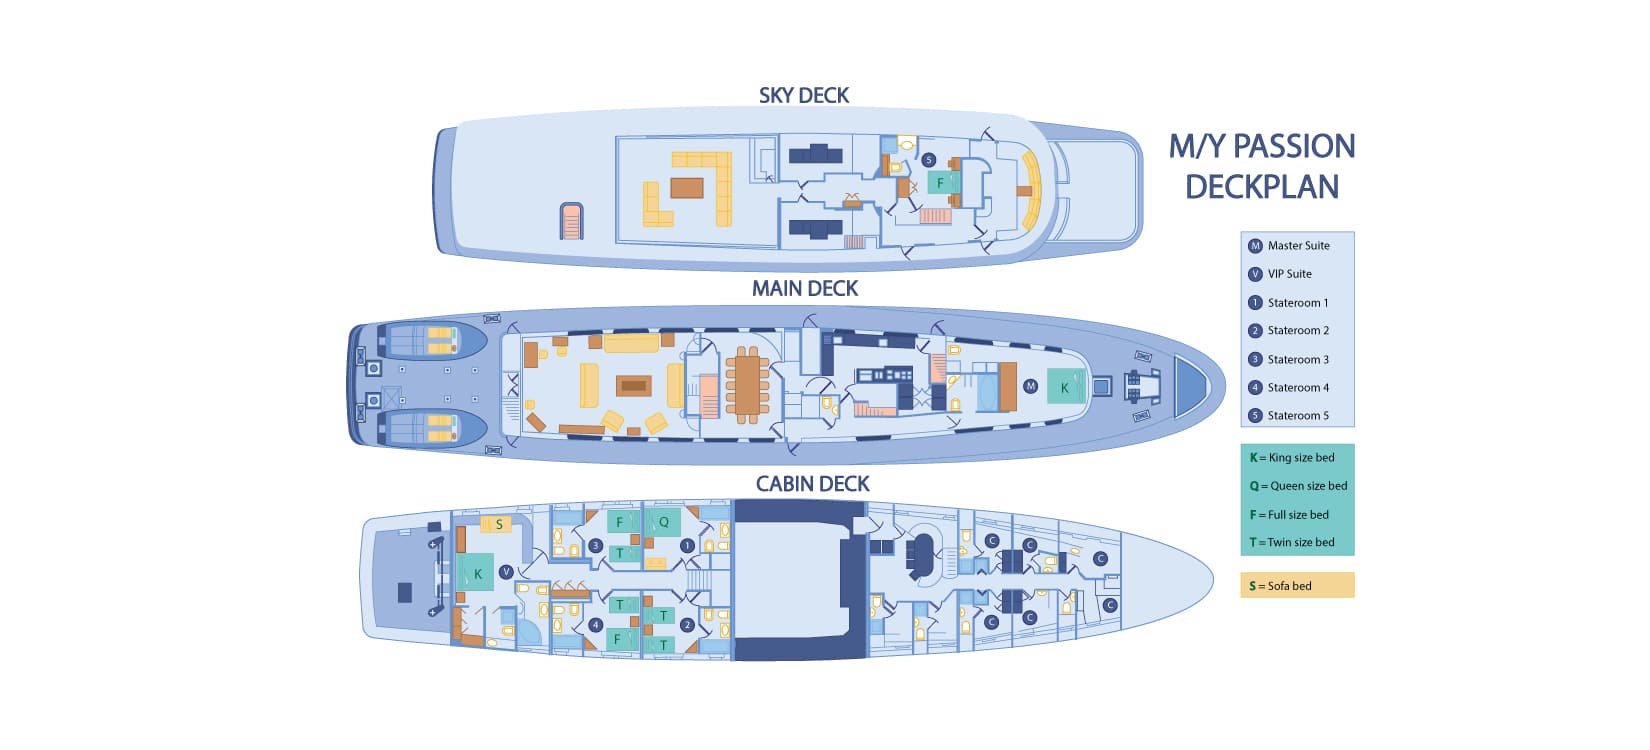 Deck plan showing 3 decks of WildAid's Passion and cabin categories color coded.